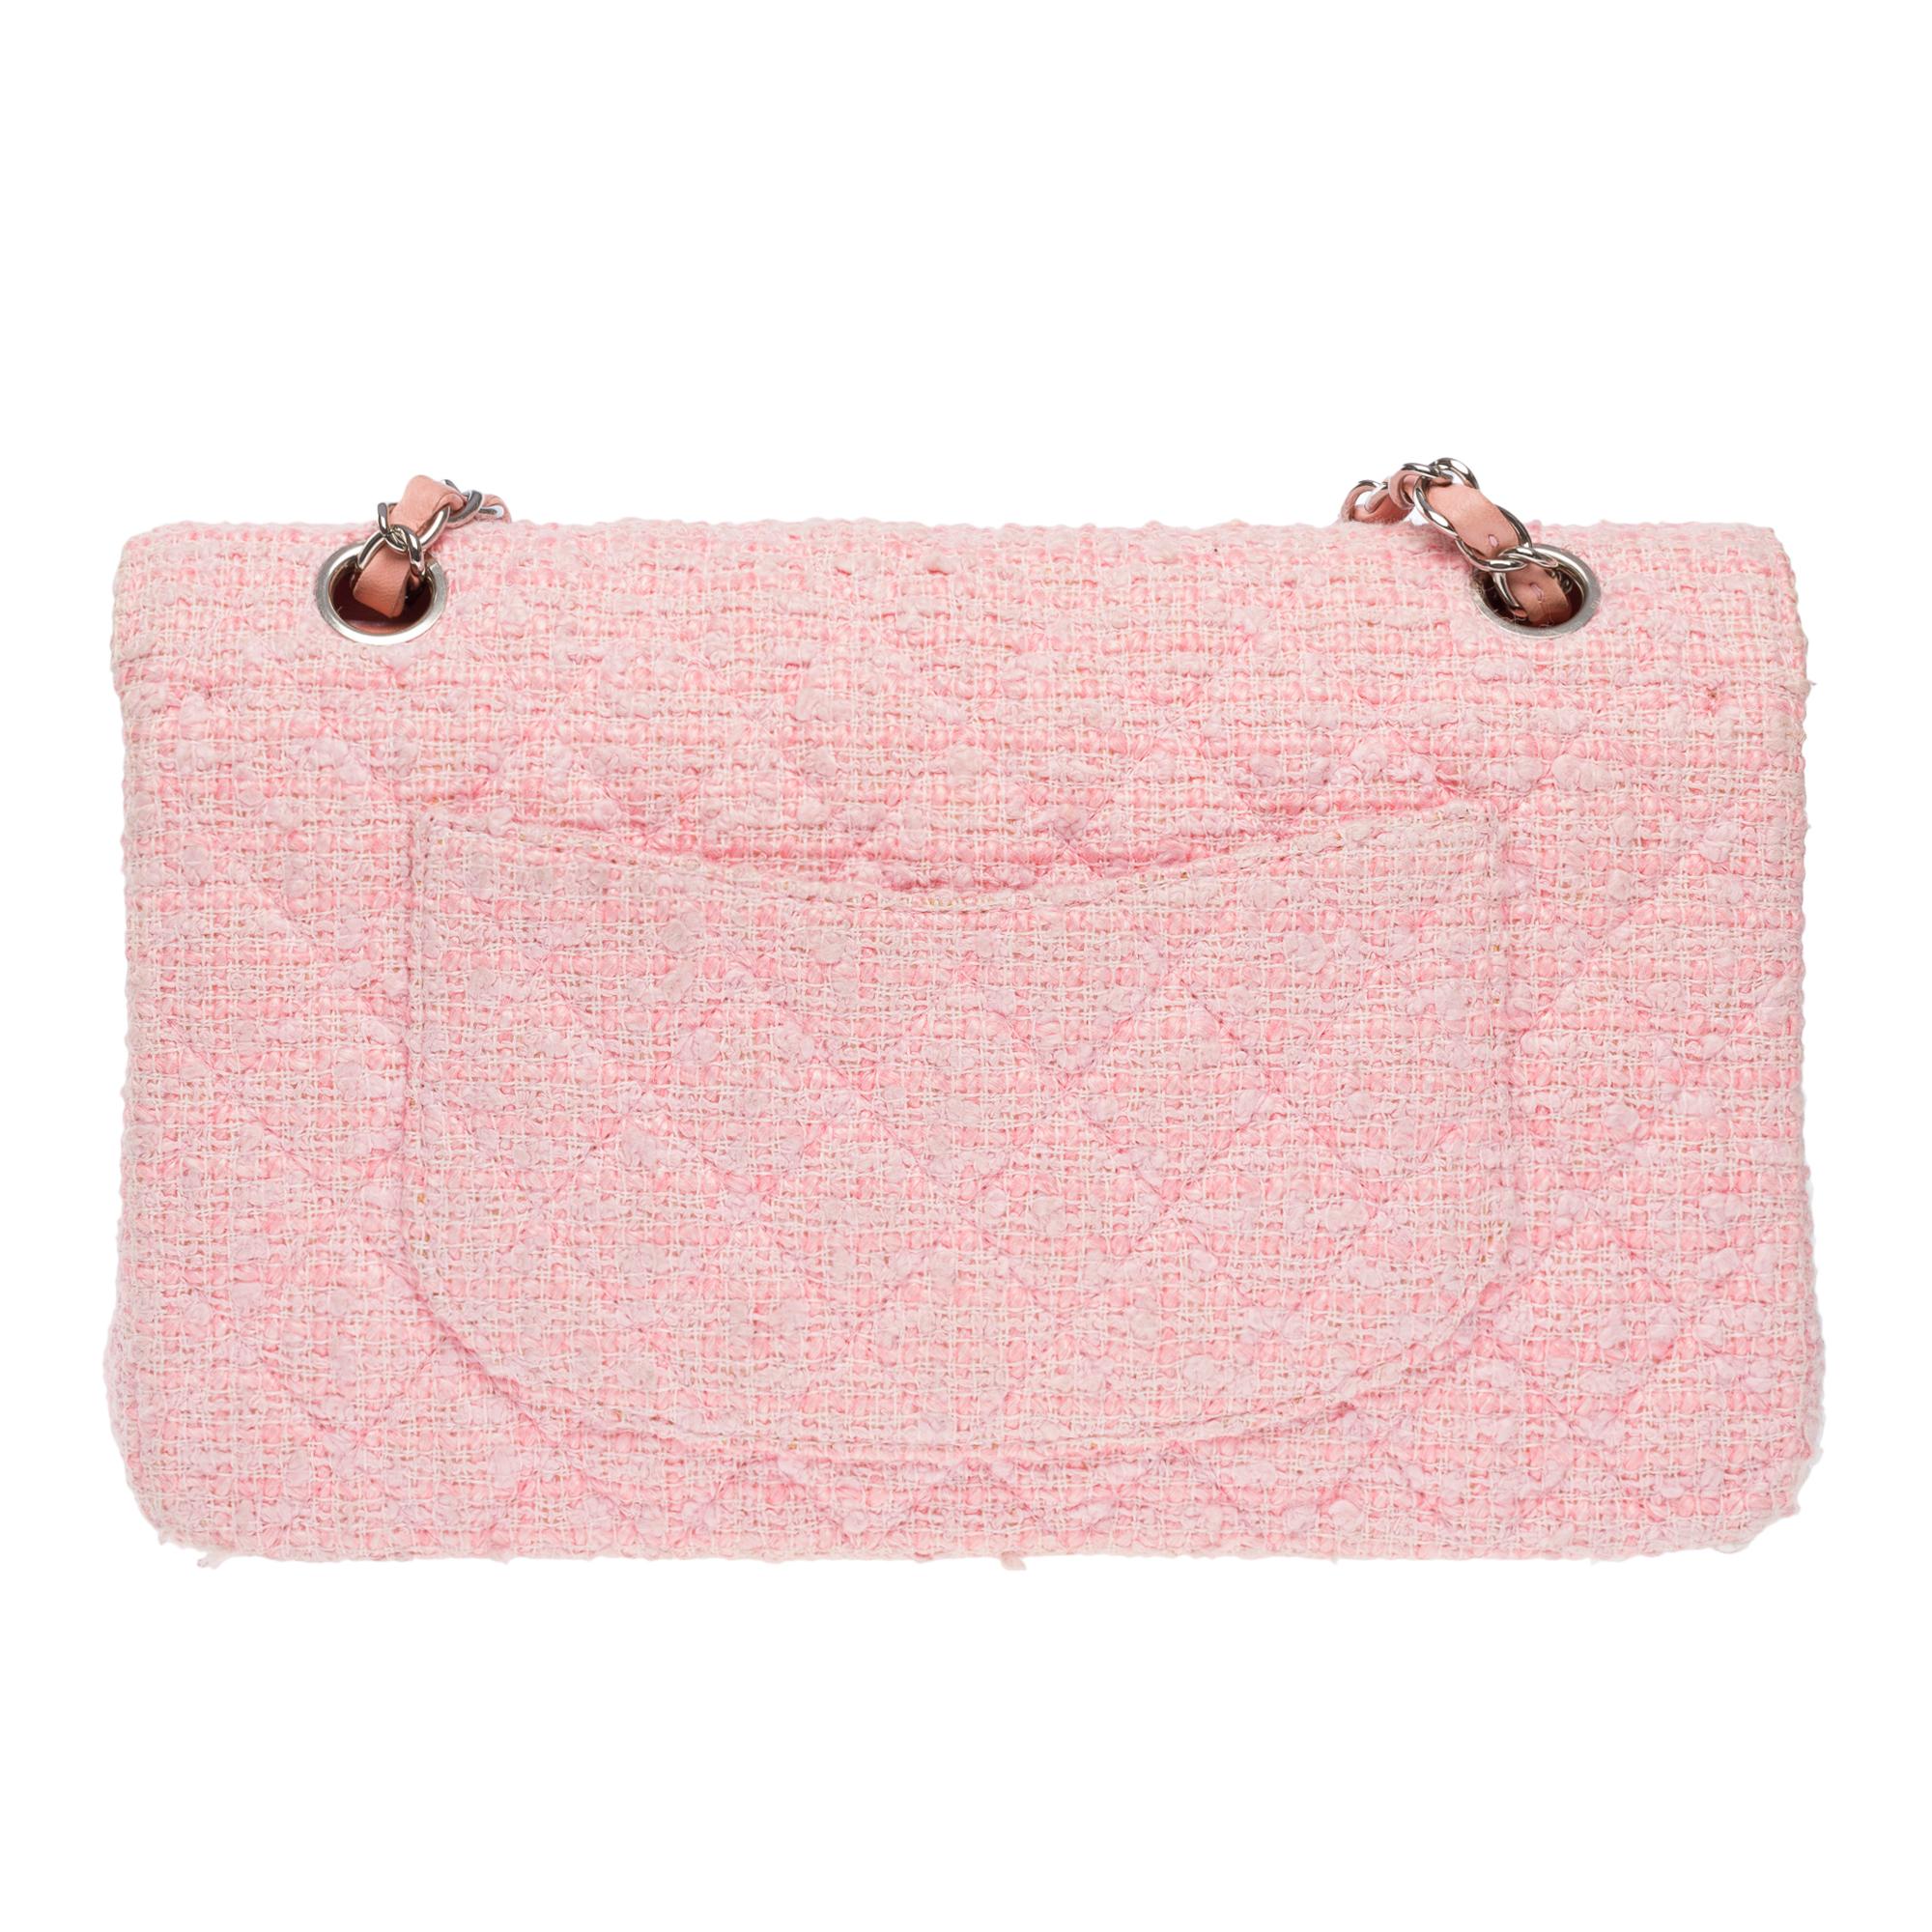 Women's Amazing Chanel Timeless double flap shoulder bag in Pink Quilted Tweed, SHW